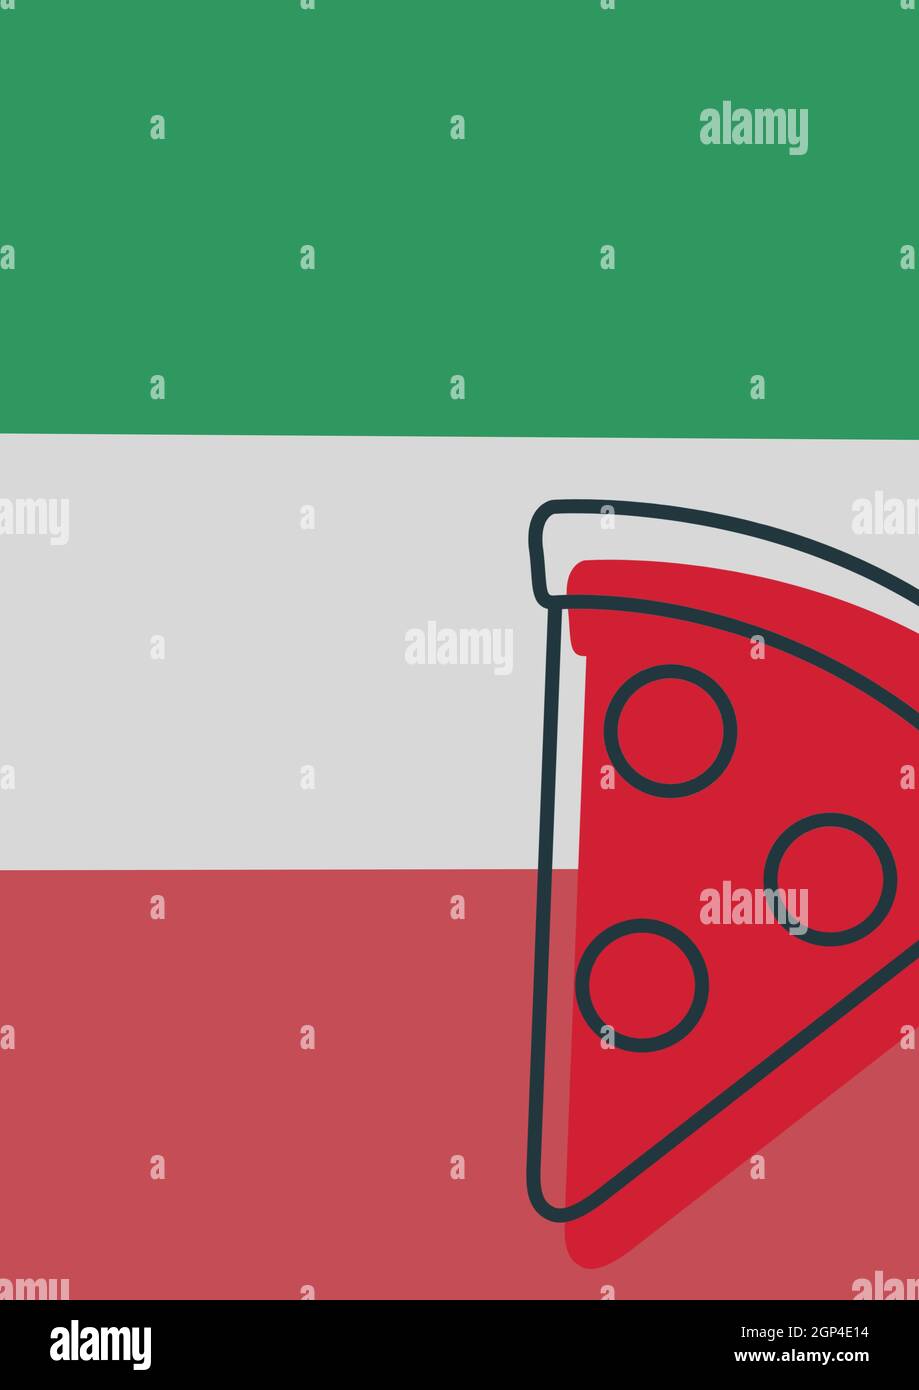 Composition of slice of pizza icon on colourful background Stock Photo